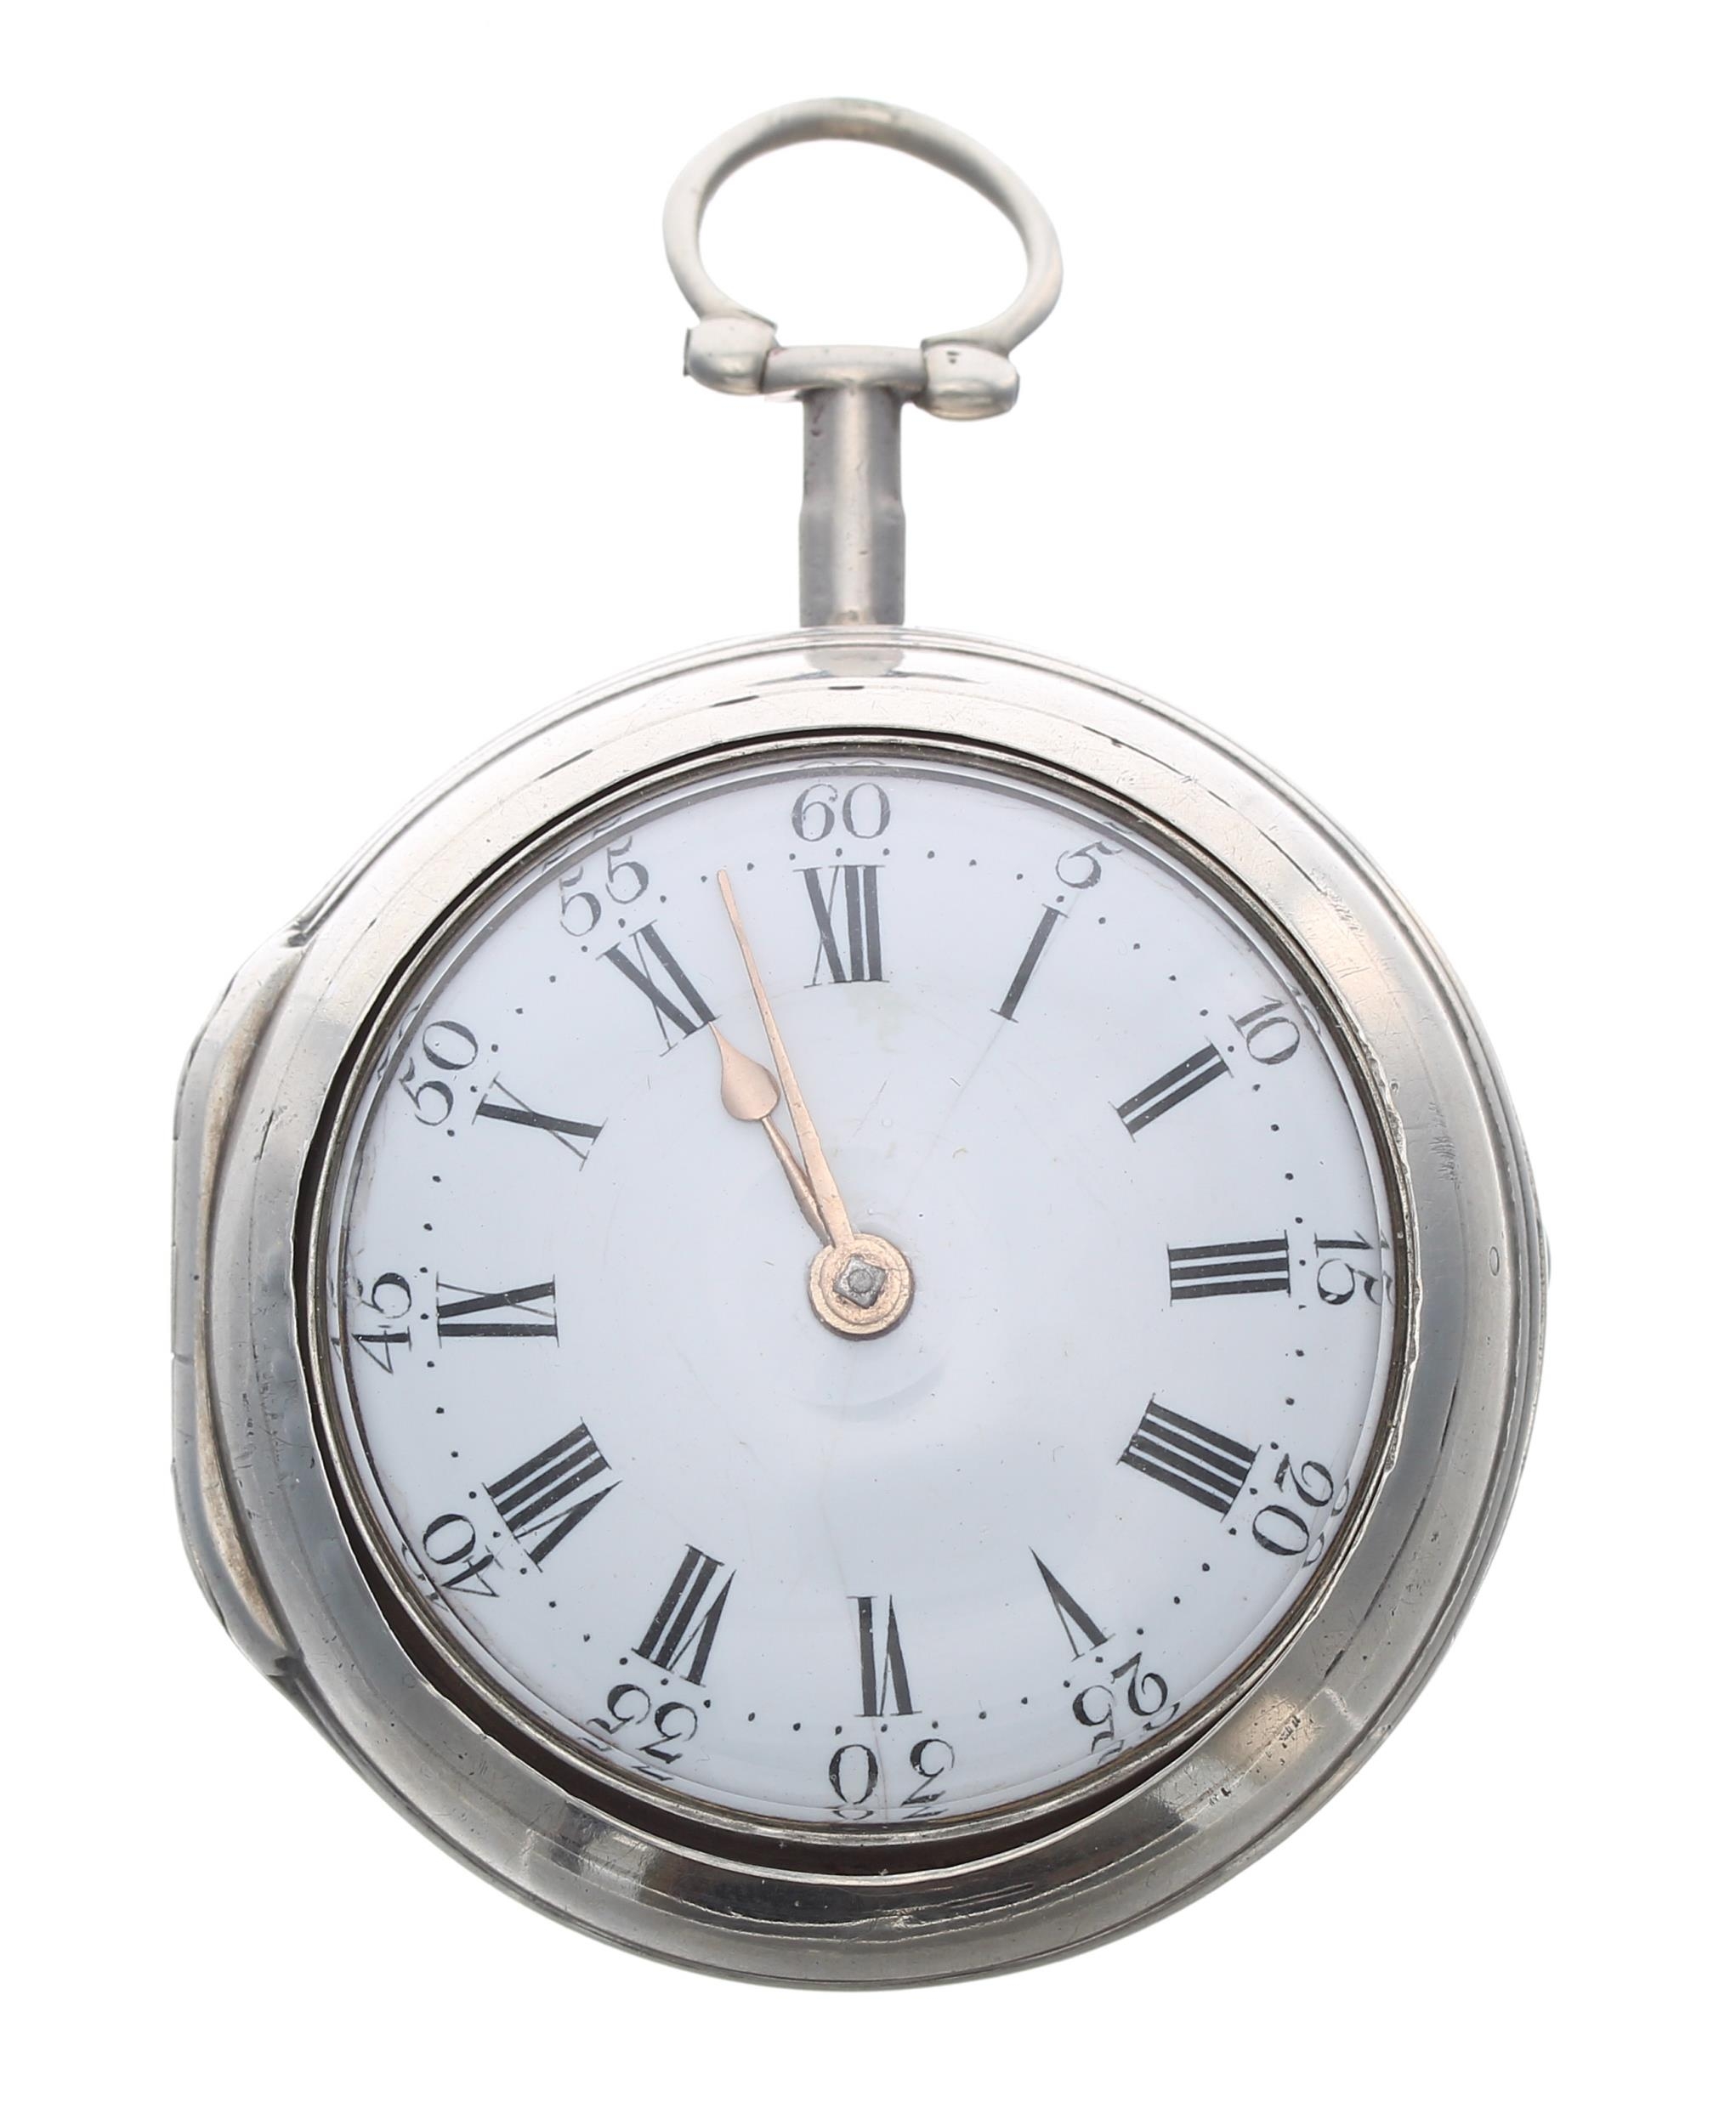 George III English silver pair cased verge pocket watch, London 1765, the fusee movement signed Thos